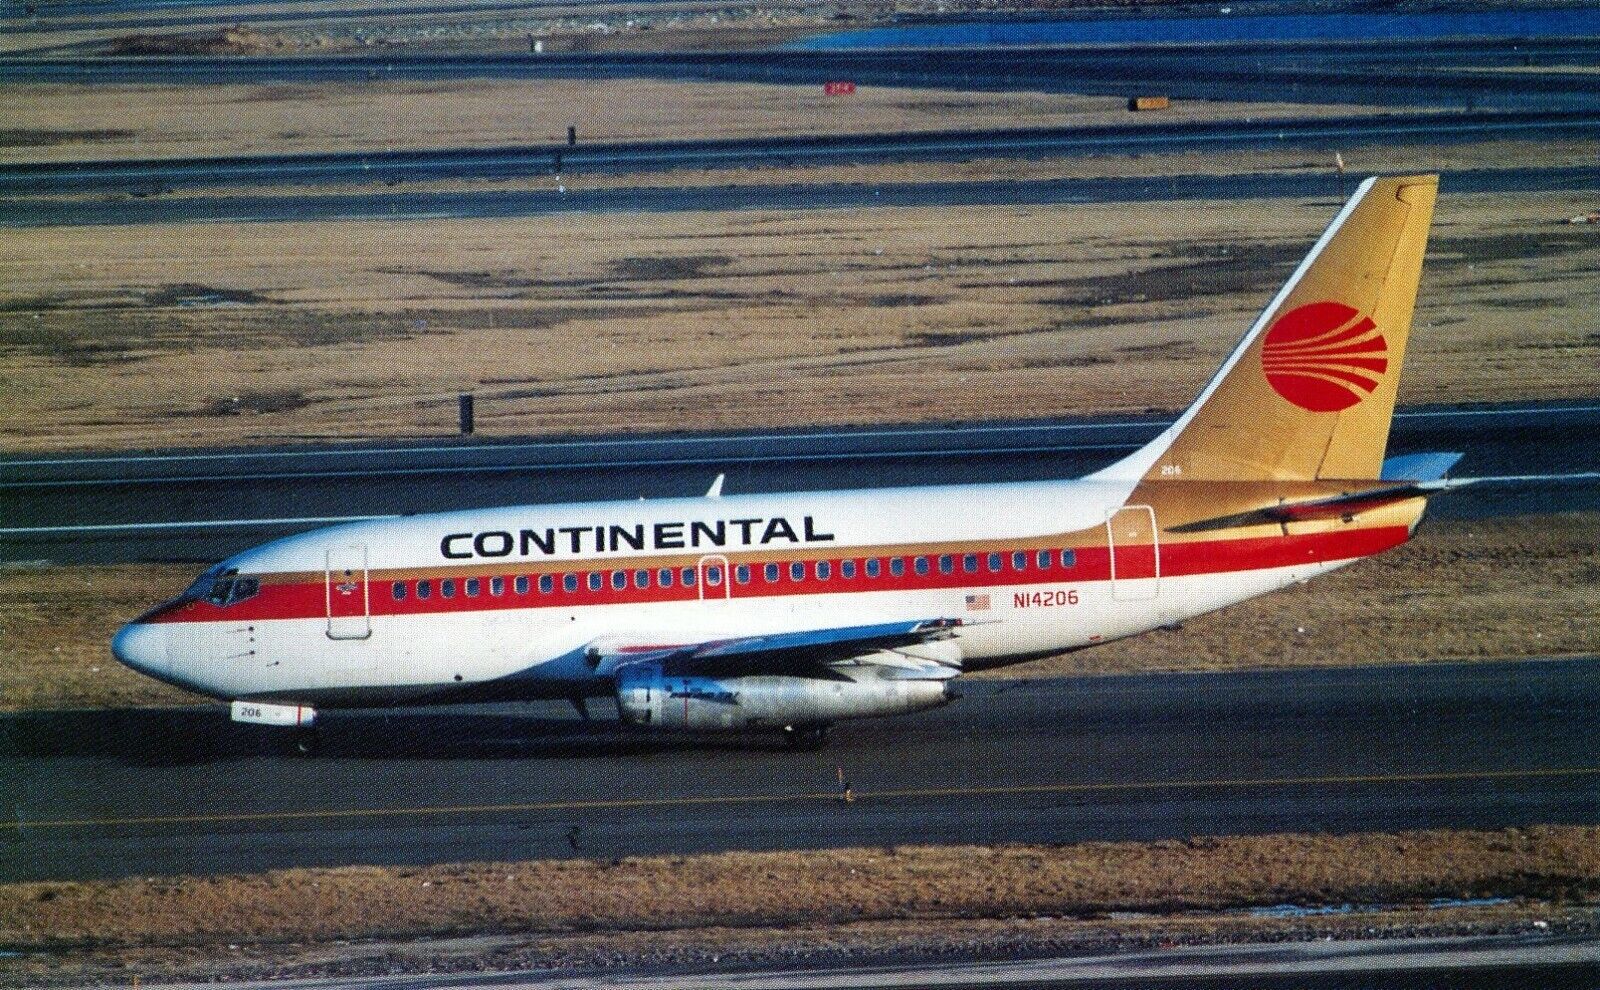 CONTINENTAL AIRLINES B-737-100  AIRPORT / AIRCRAFT / AIRPLANE   N14206 /  UNITED